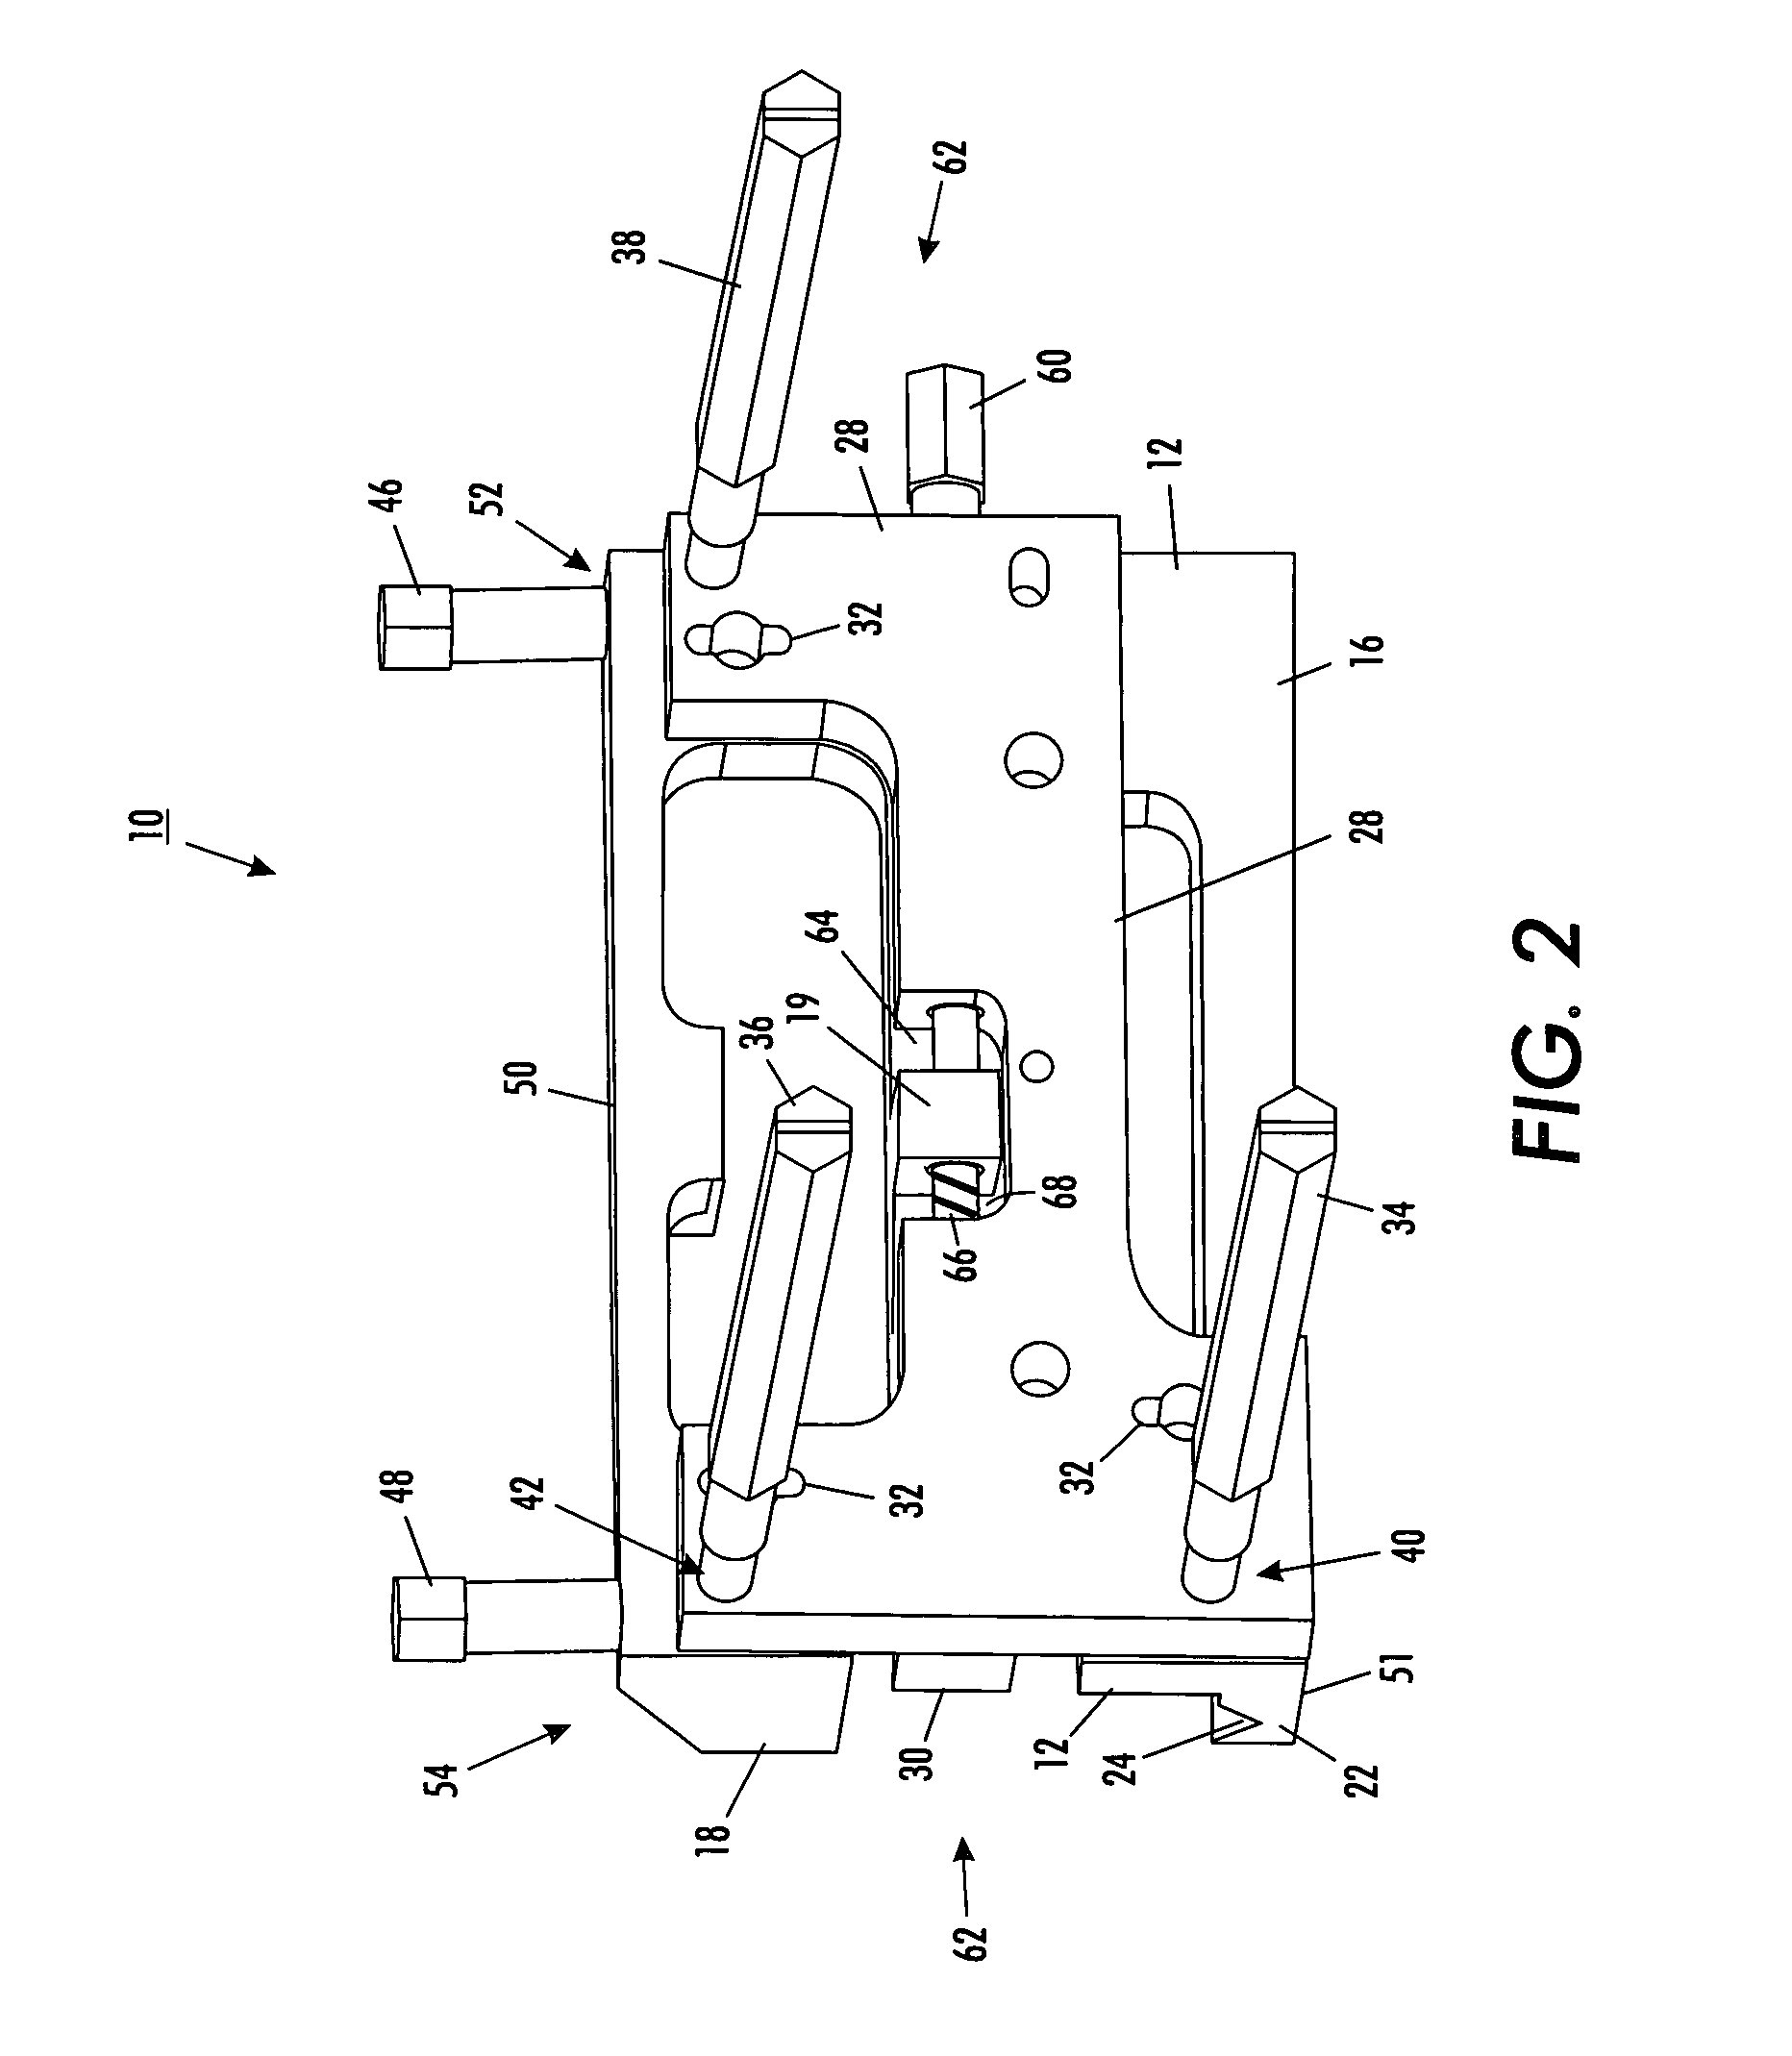 Alignment mechanism for direct marking printheads and a method for aligning printheads in a printer